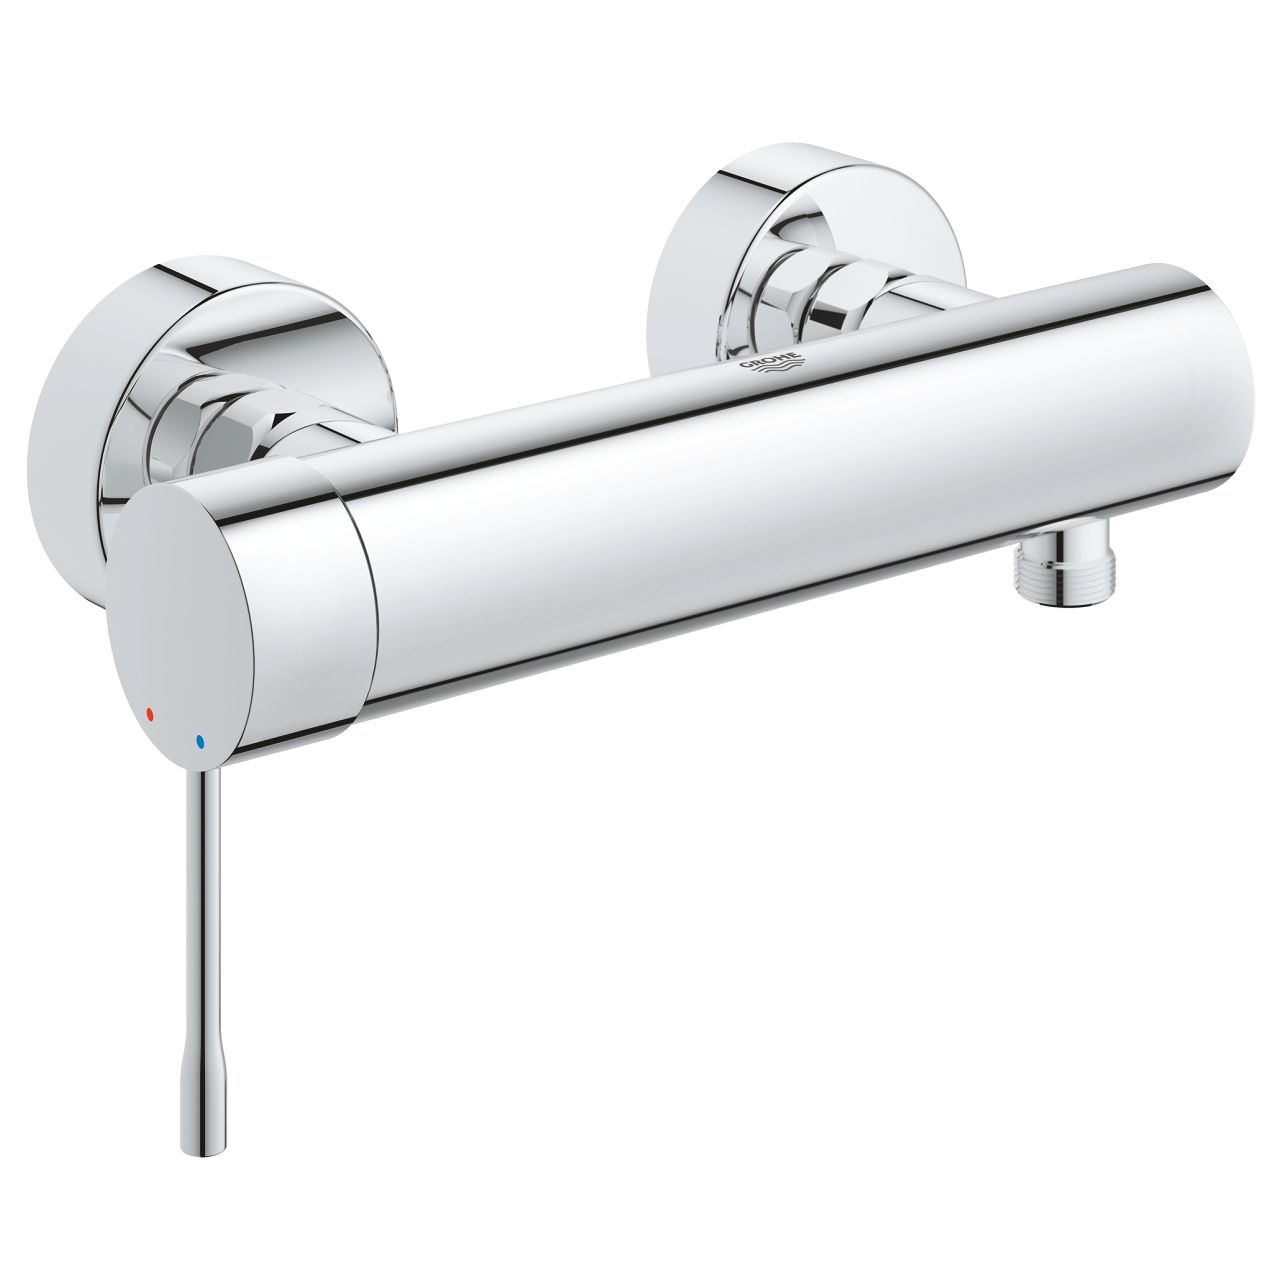  Grohe Essence single-lever shower mixer - 33636001 